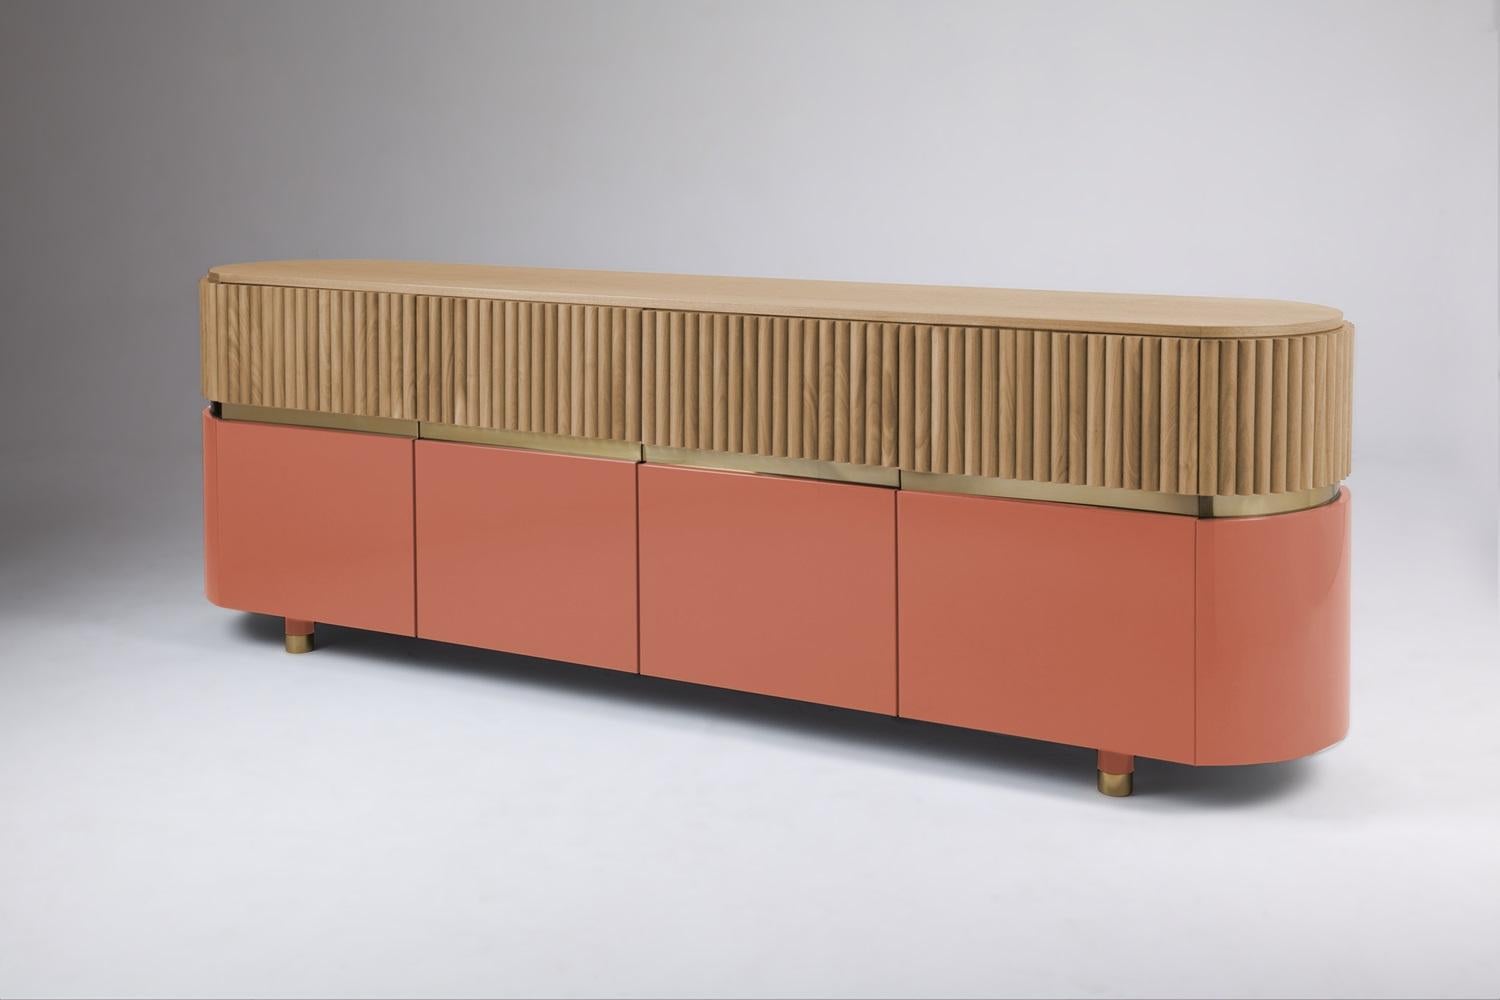 Like its name suggests, Berlin sideboard is inspired by Bauhaus, a wave of thought that is impossible to overlook when passing through the streets of Berlin. In a more down to earth piece, clean lines and a certain absence of excessive ornamentation